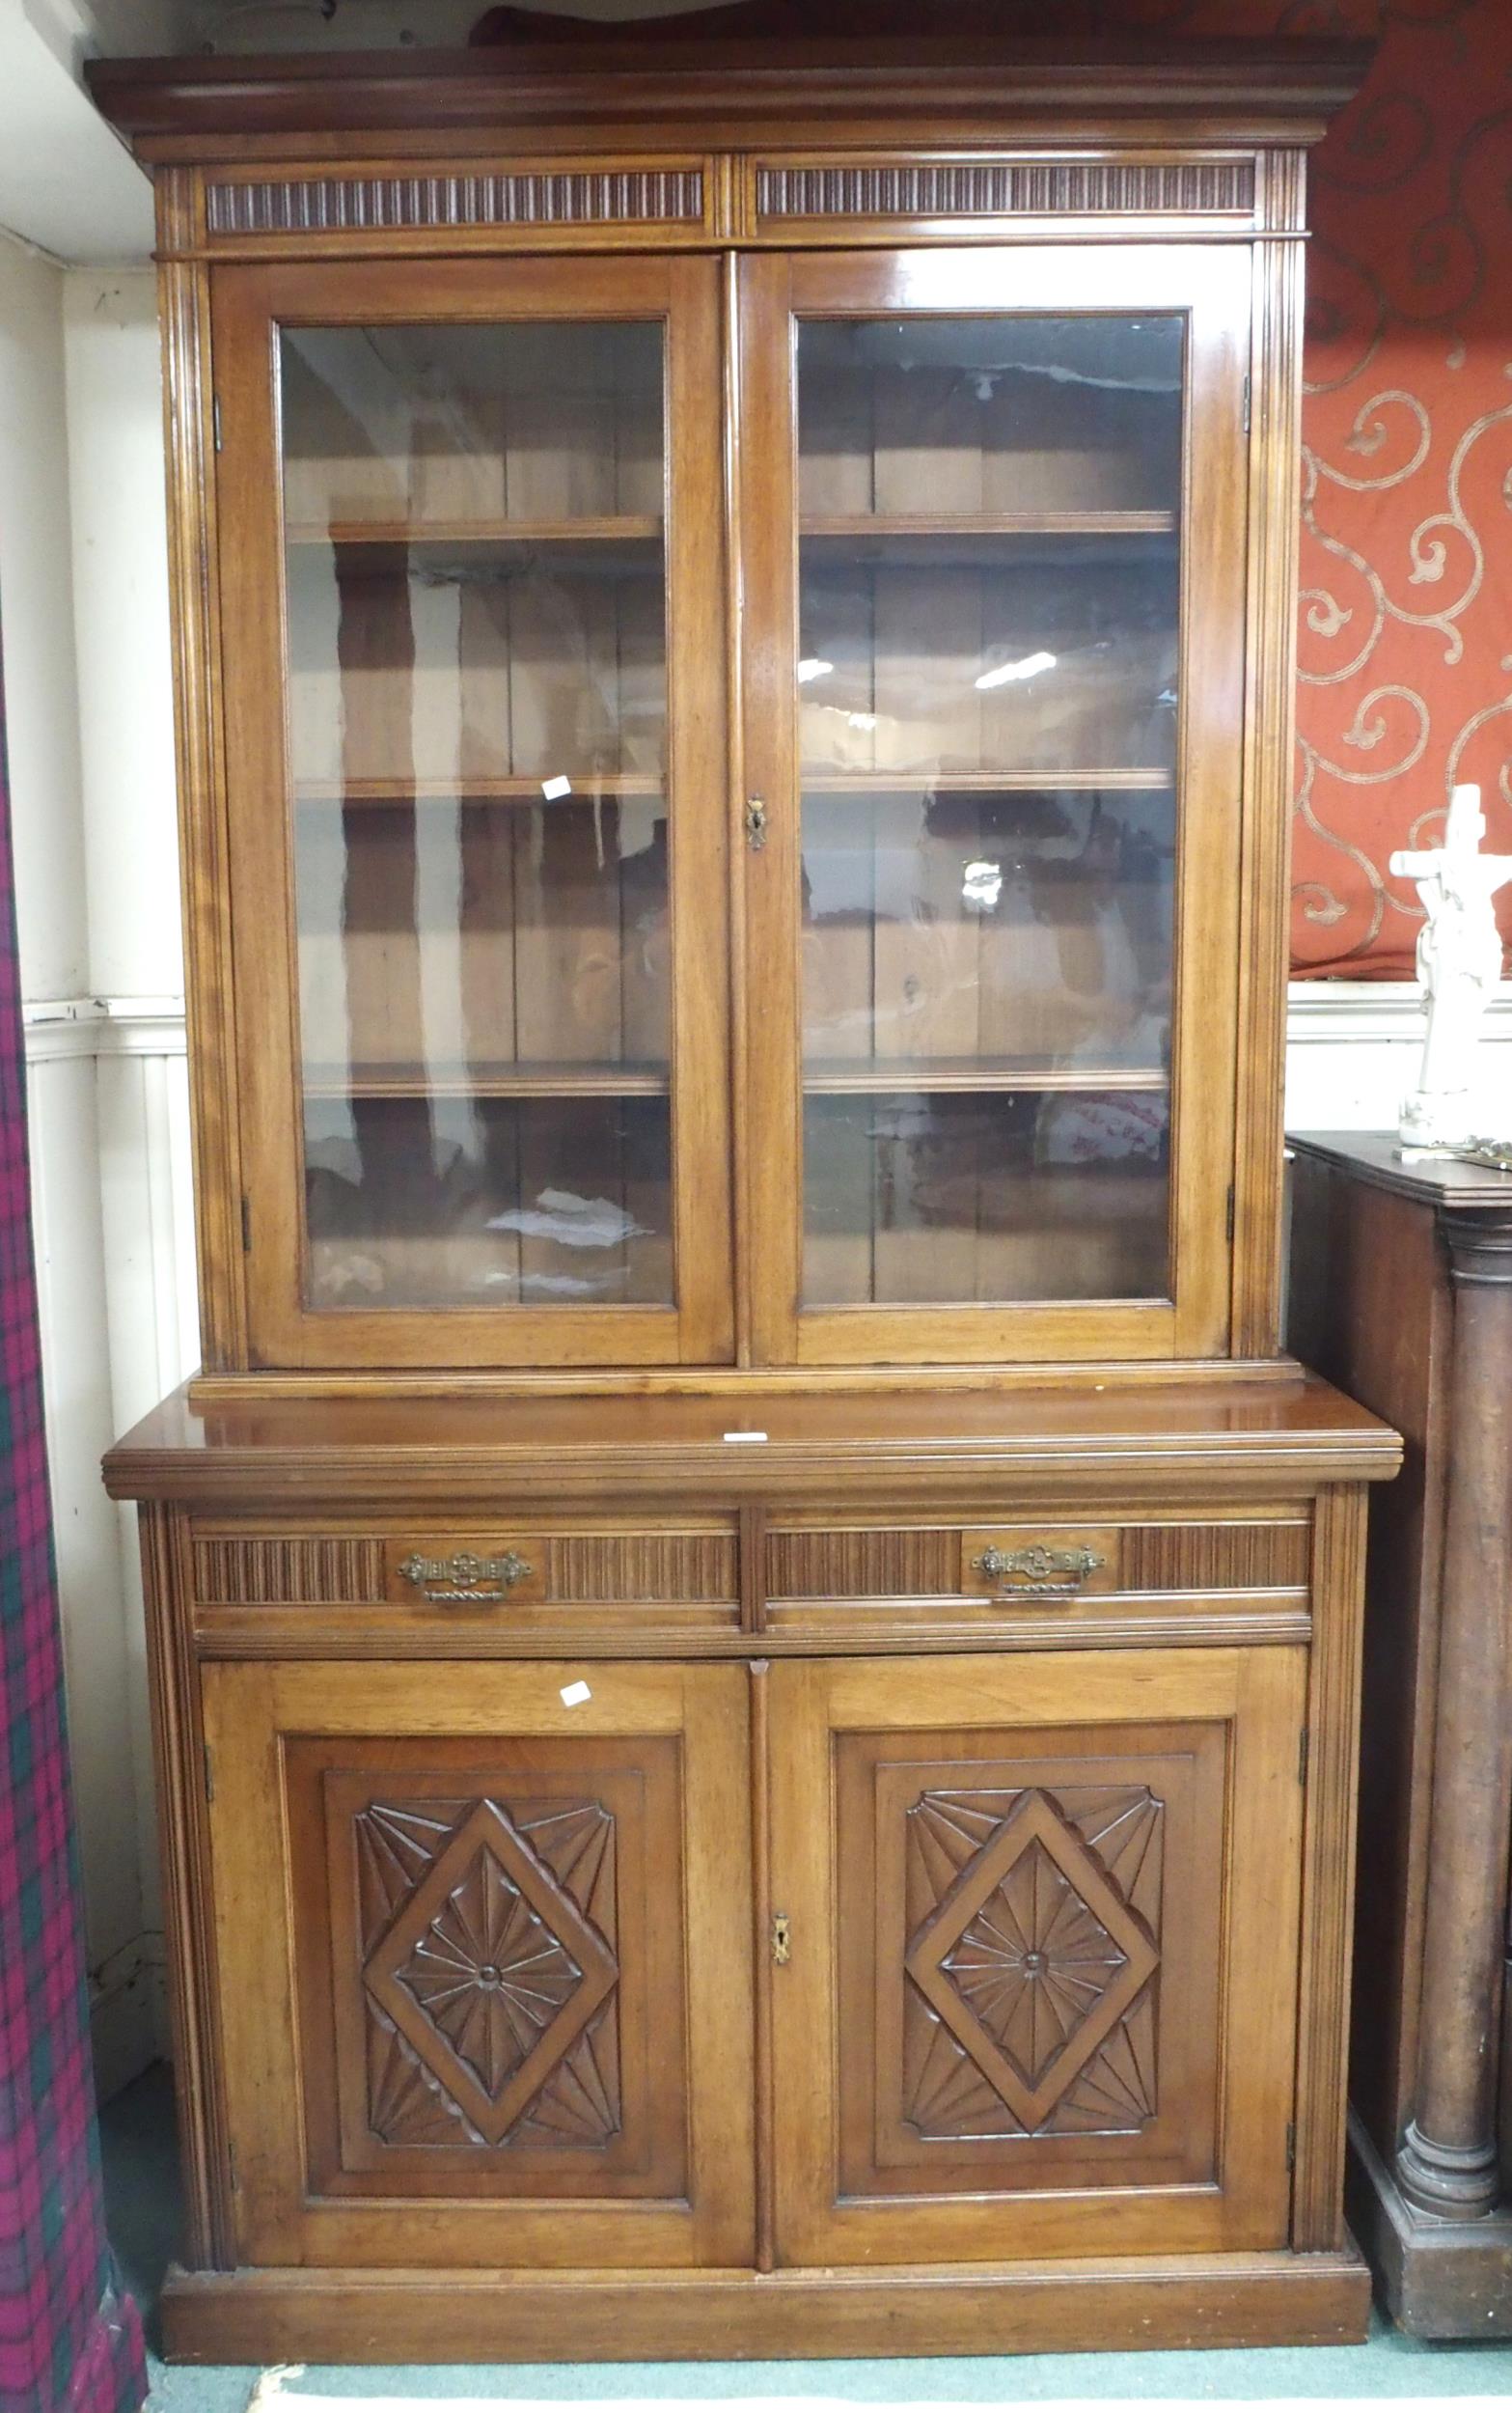 A Victorian mahogany bookcase on base with moulded cornice over pair of glazed doors over drawers